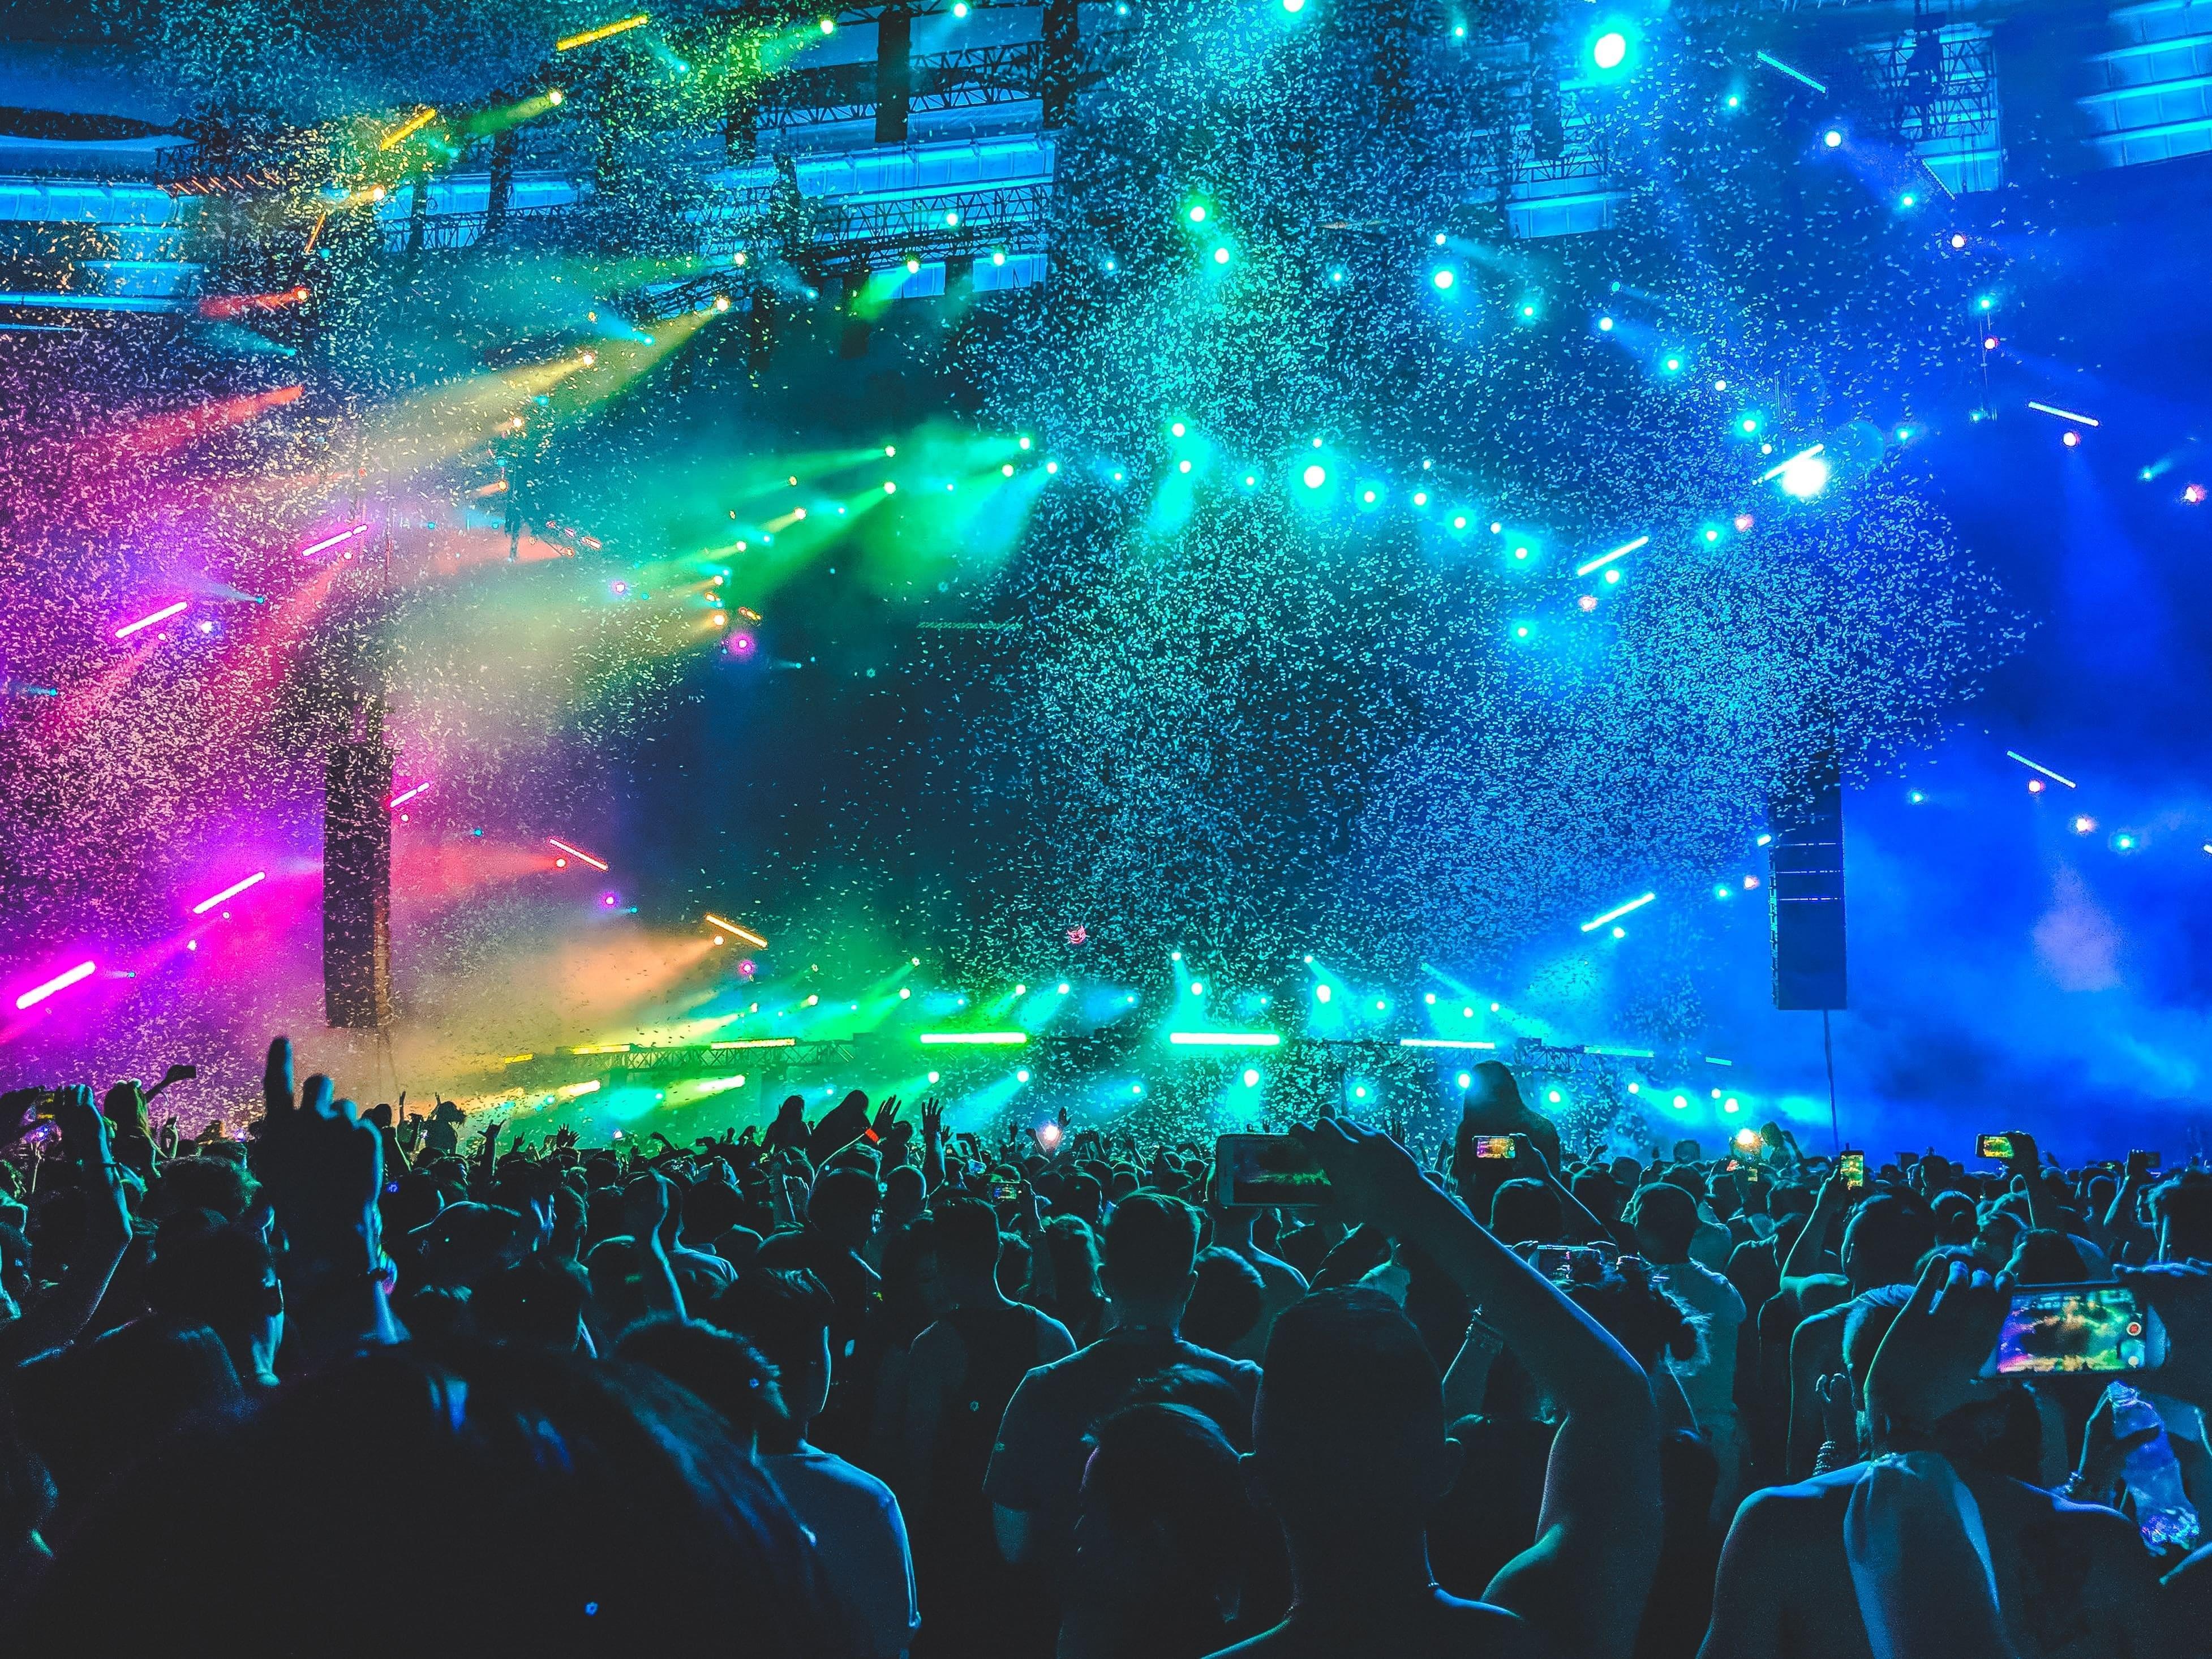 A large crowd facing a stage at a music festival with rainbow spectrum spotlights and confetti